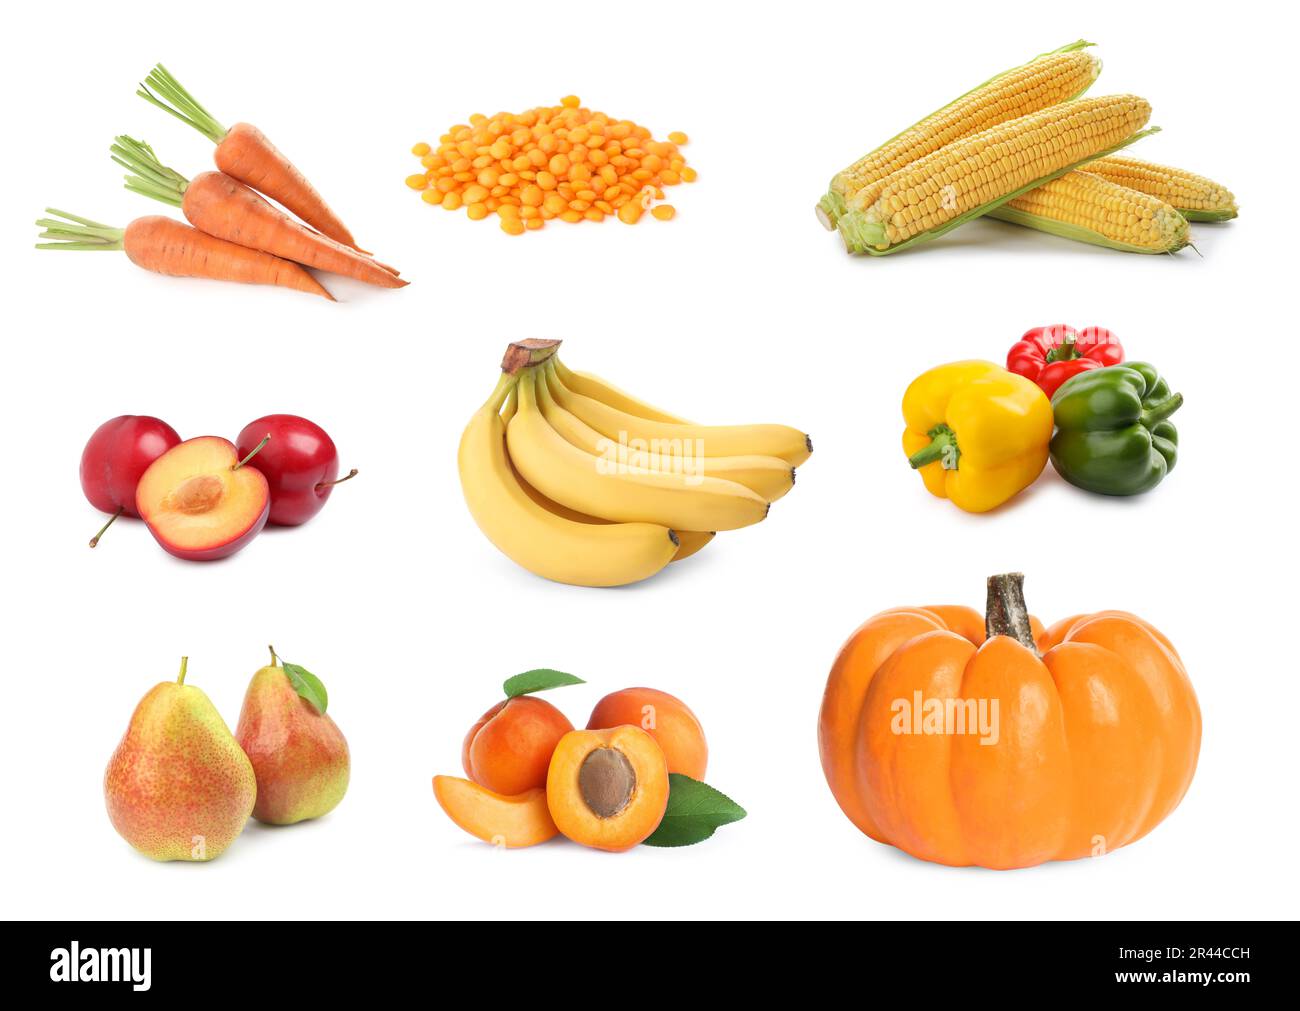 Set with many different fruits, vegetables and pile of lentils on white background Stock Photo